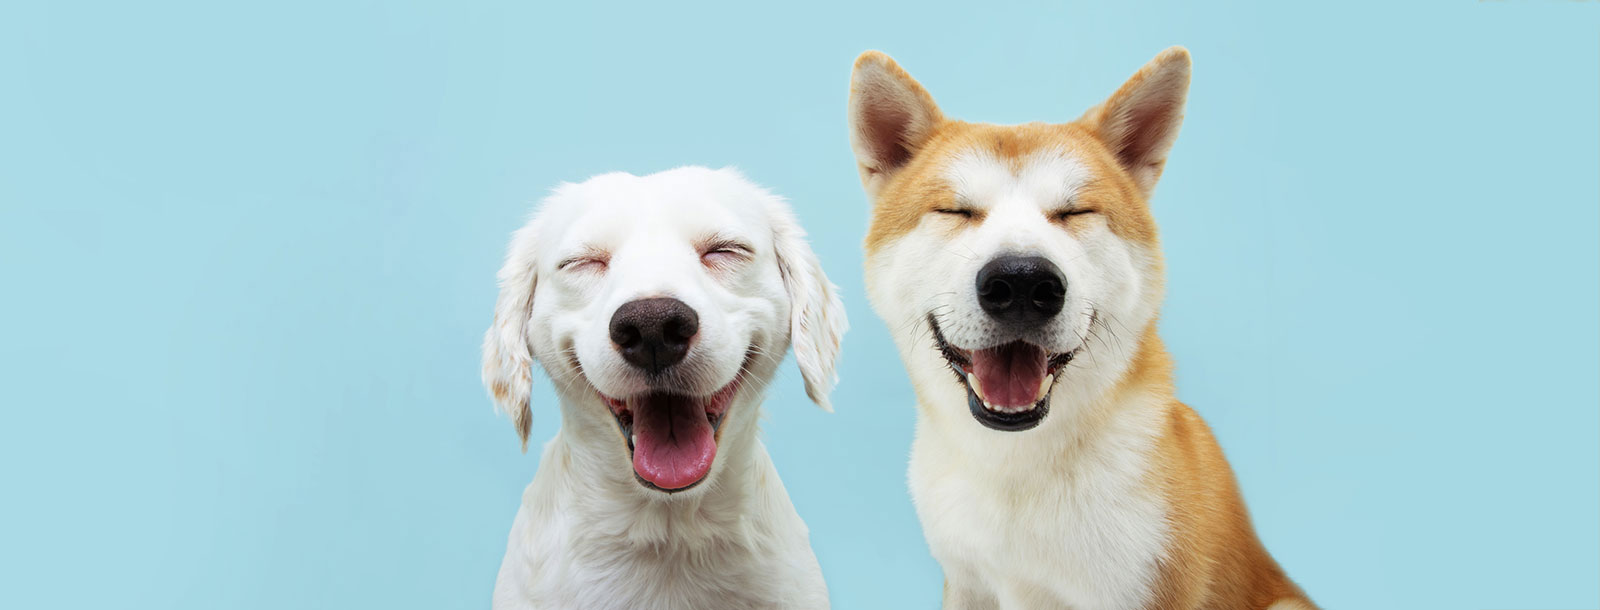 Two dogs smiling with light blue background.